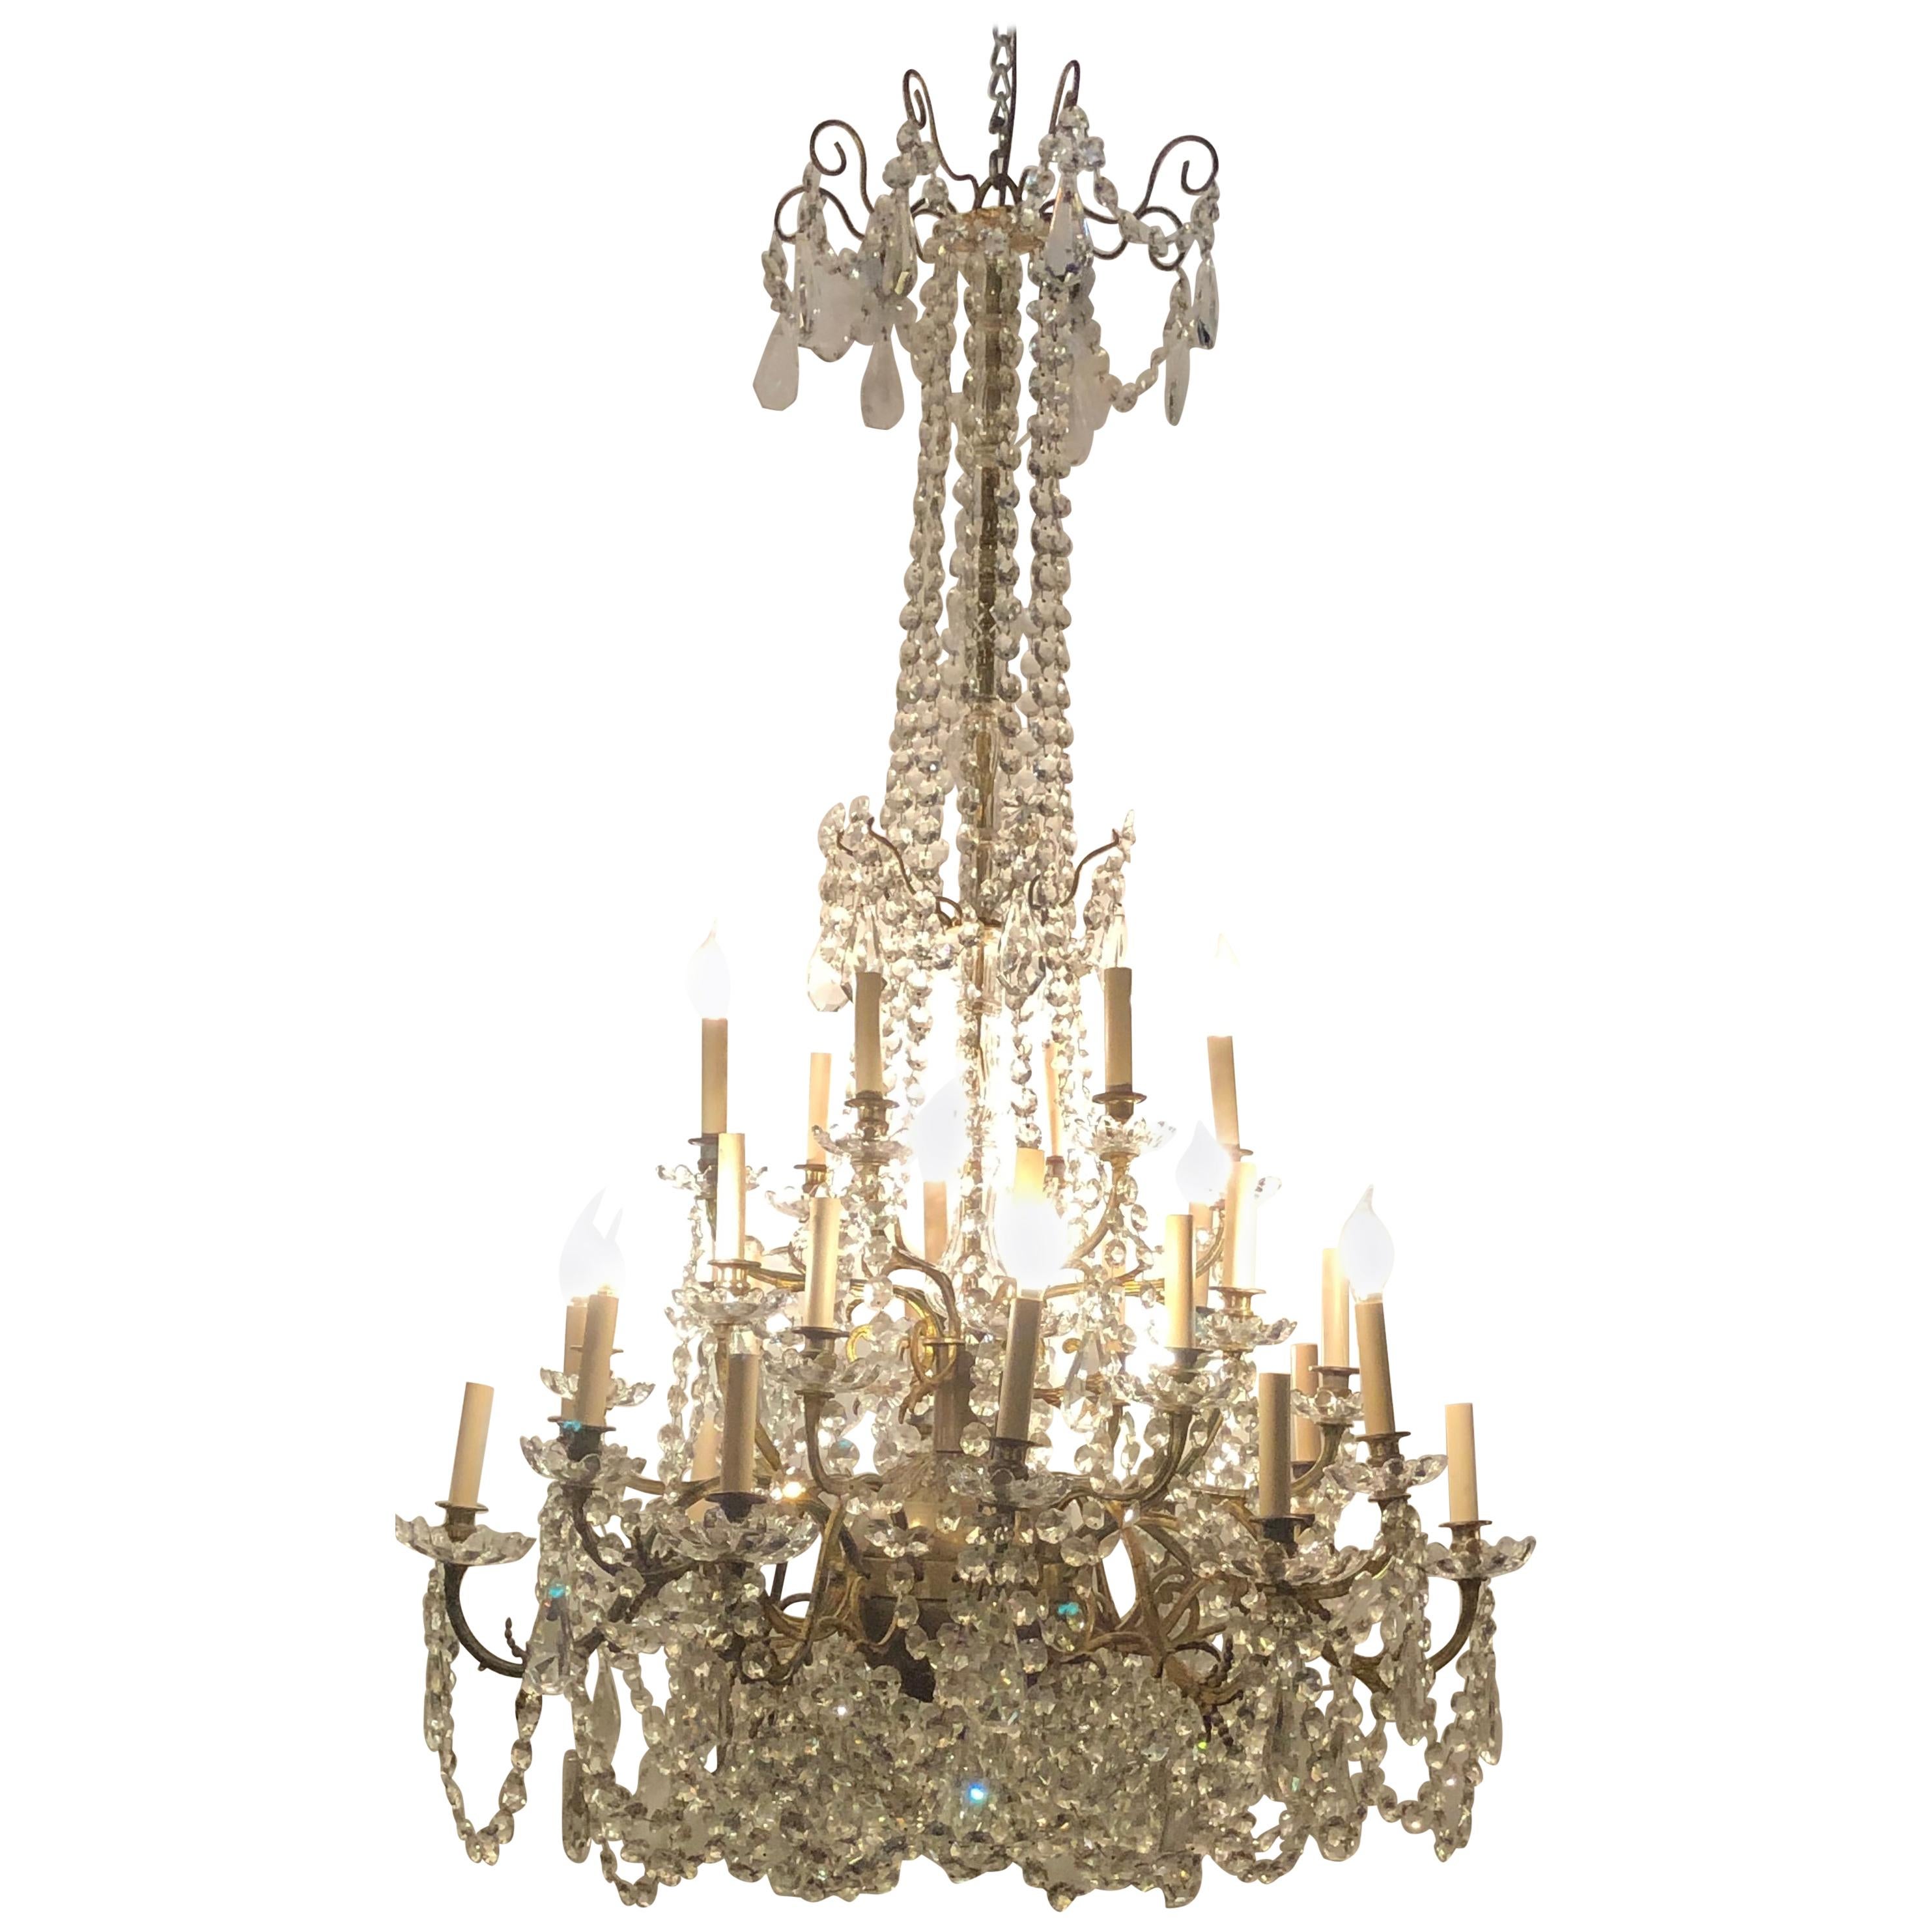 Palatial 19th-20th Century Thirty-Light Crystal and Brass Column Form Chandelier